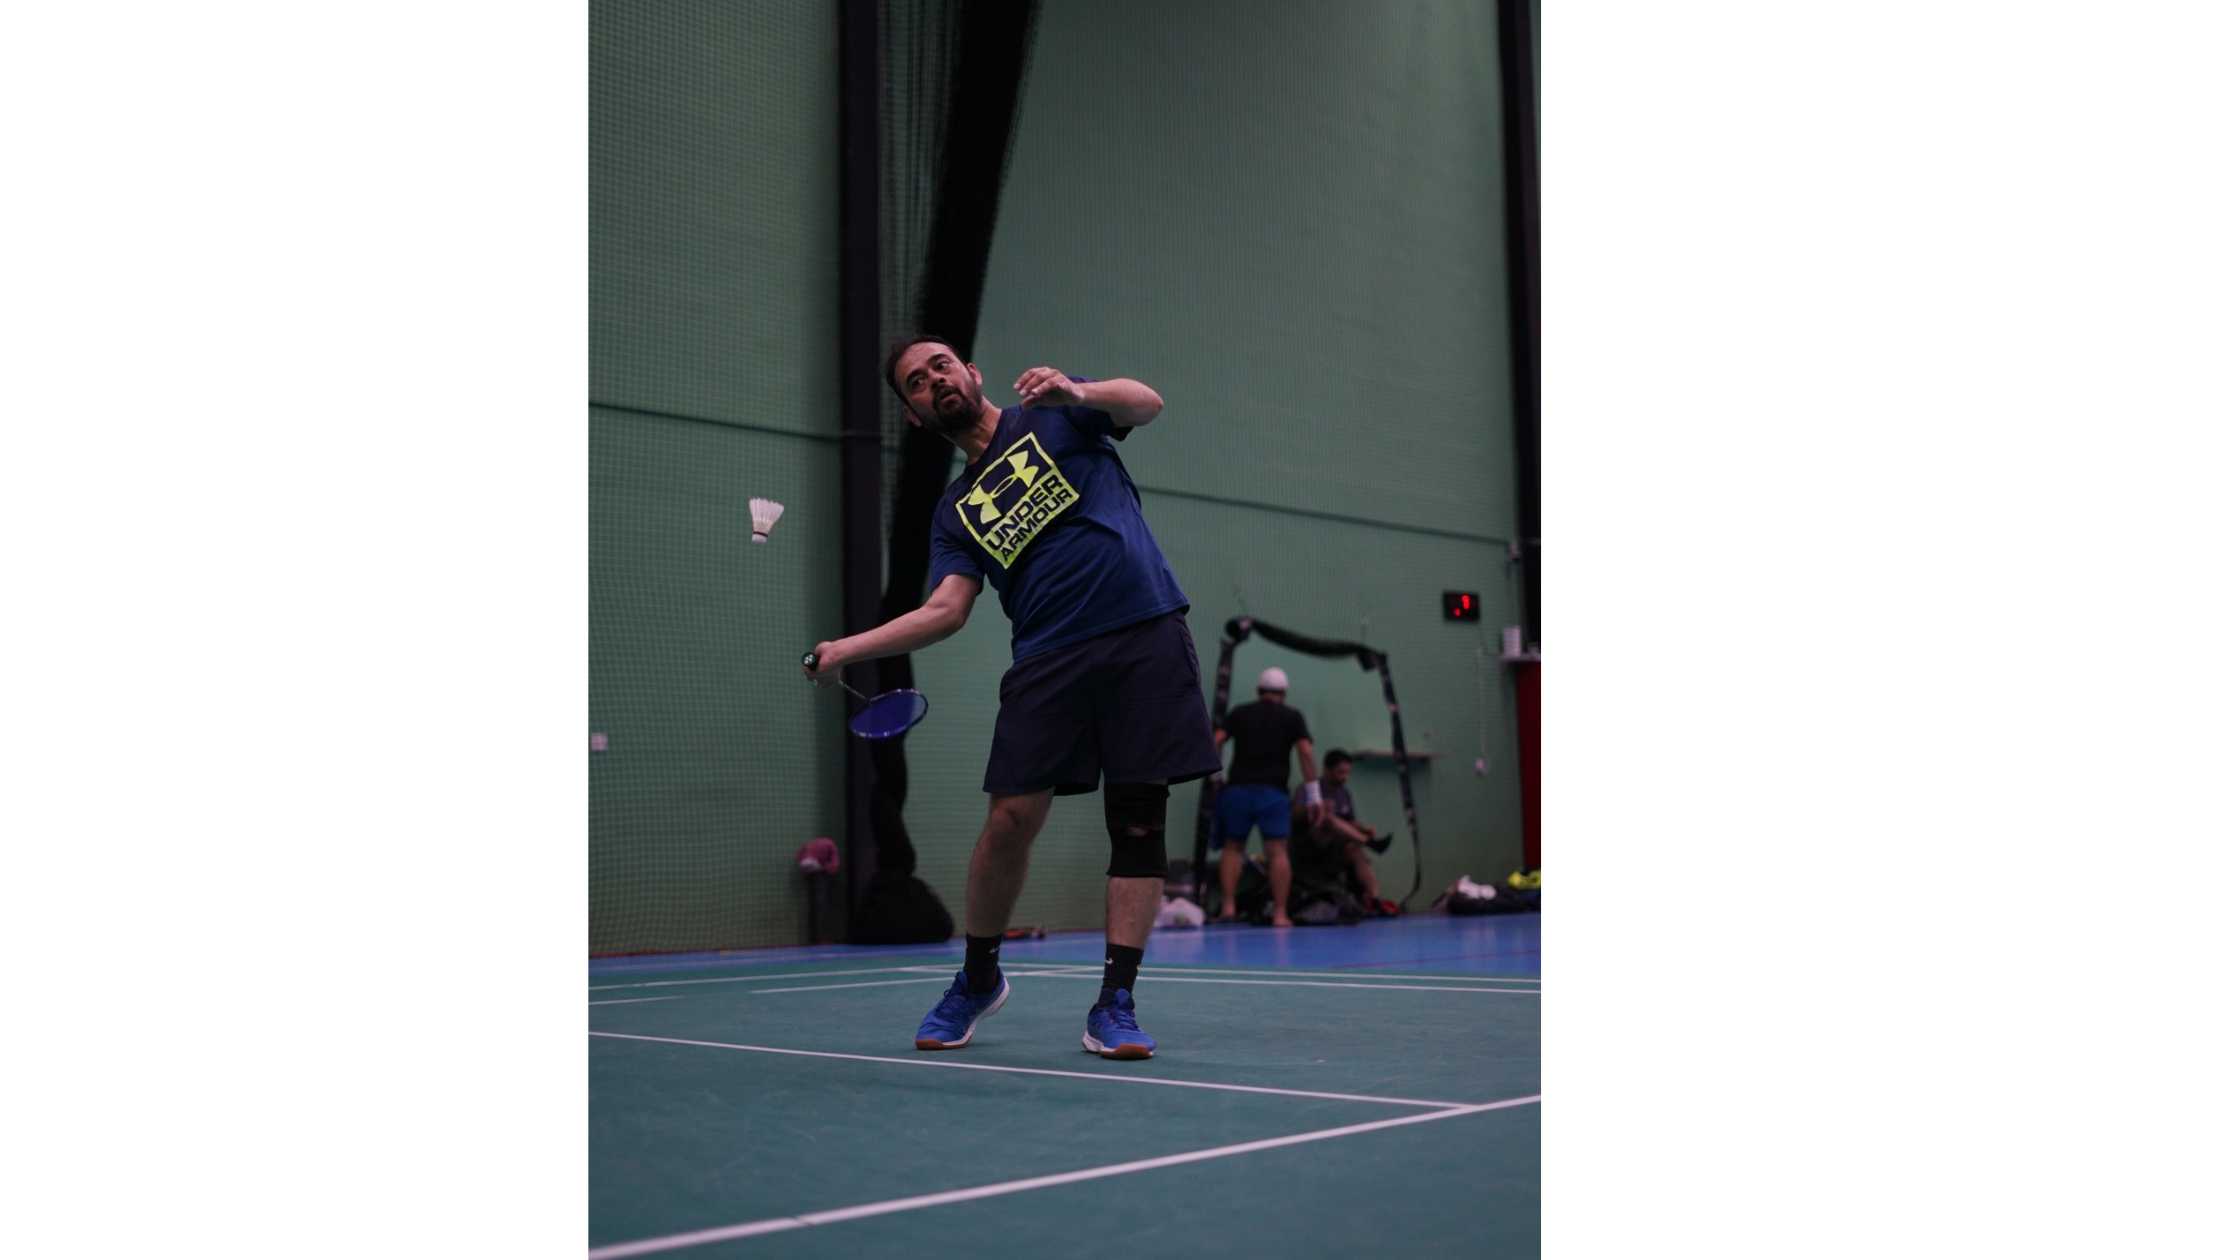 Discover How to Soar Your Badminton Skills with Expert Coaching in Dubai1. The Best Badminton Coaching Centers in Dubai: Discuss different coaching centers, their facilities, the qualifications of their coaches, and success stories from their students.